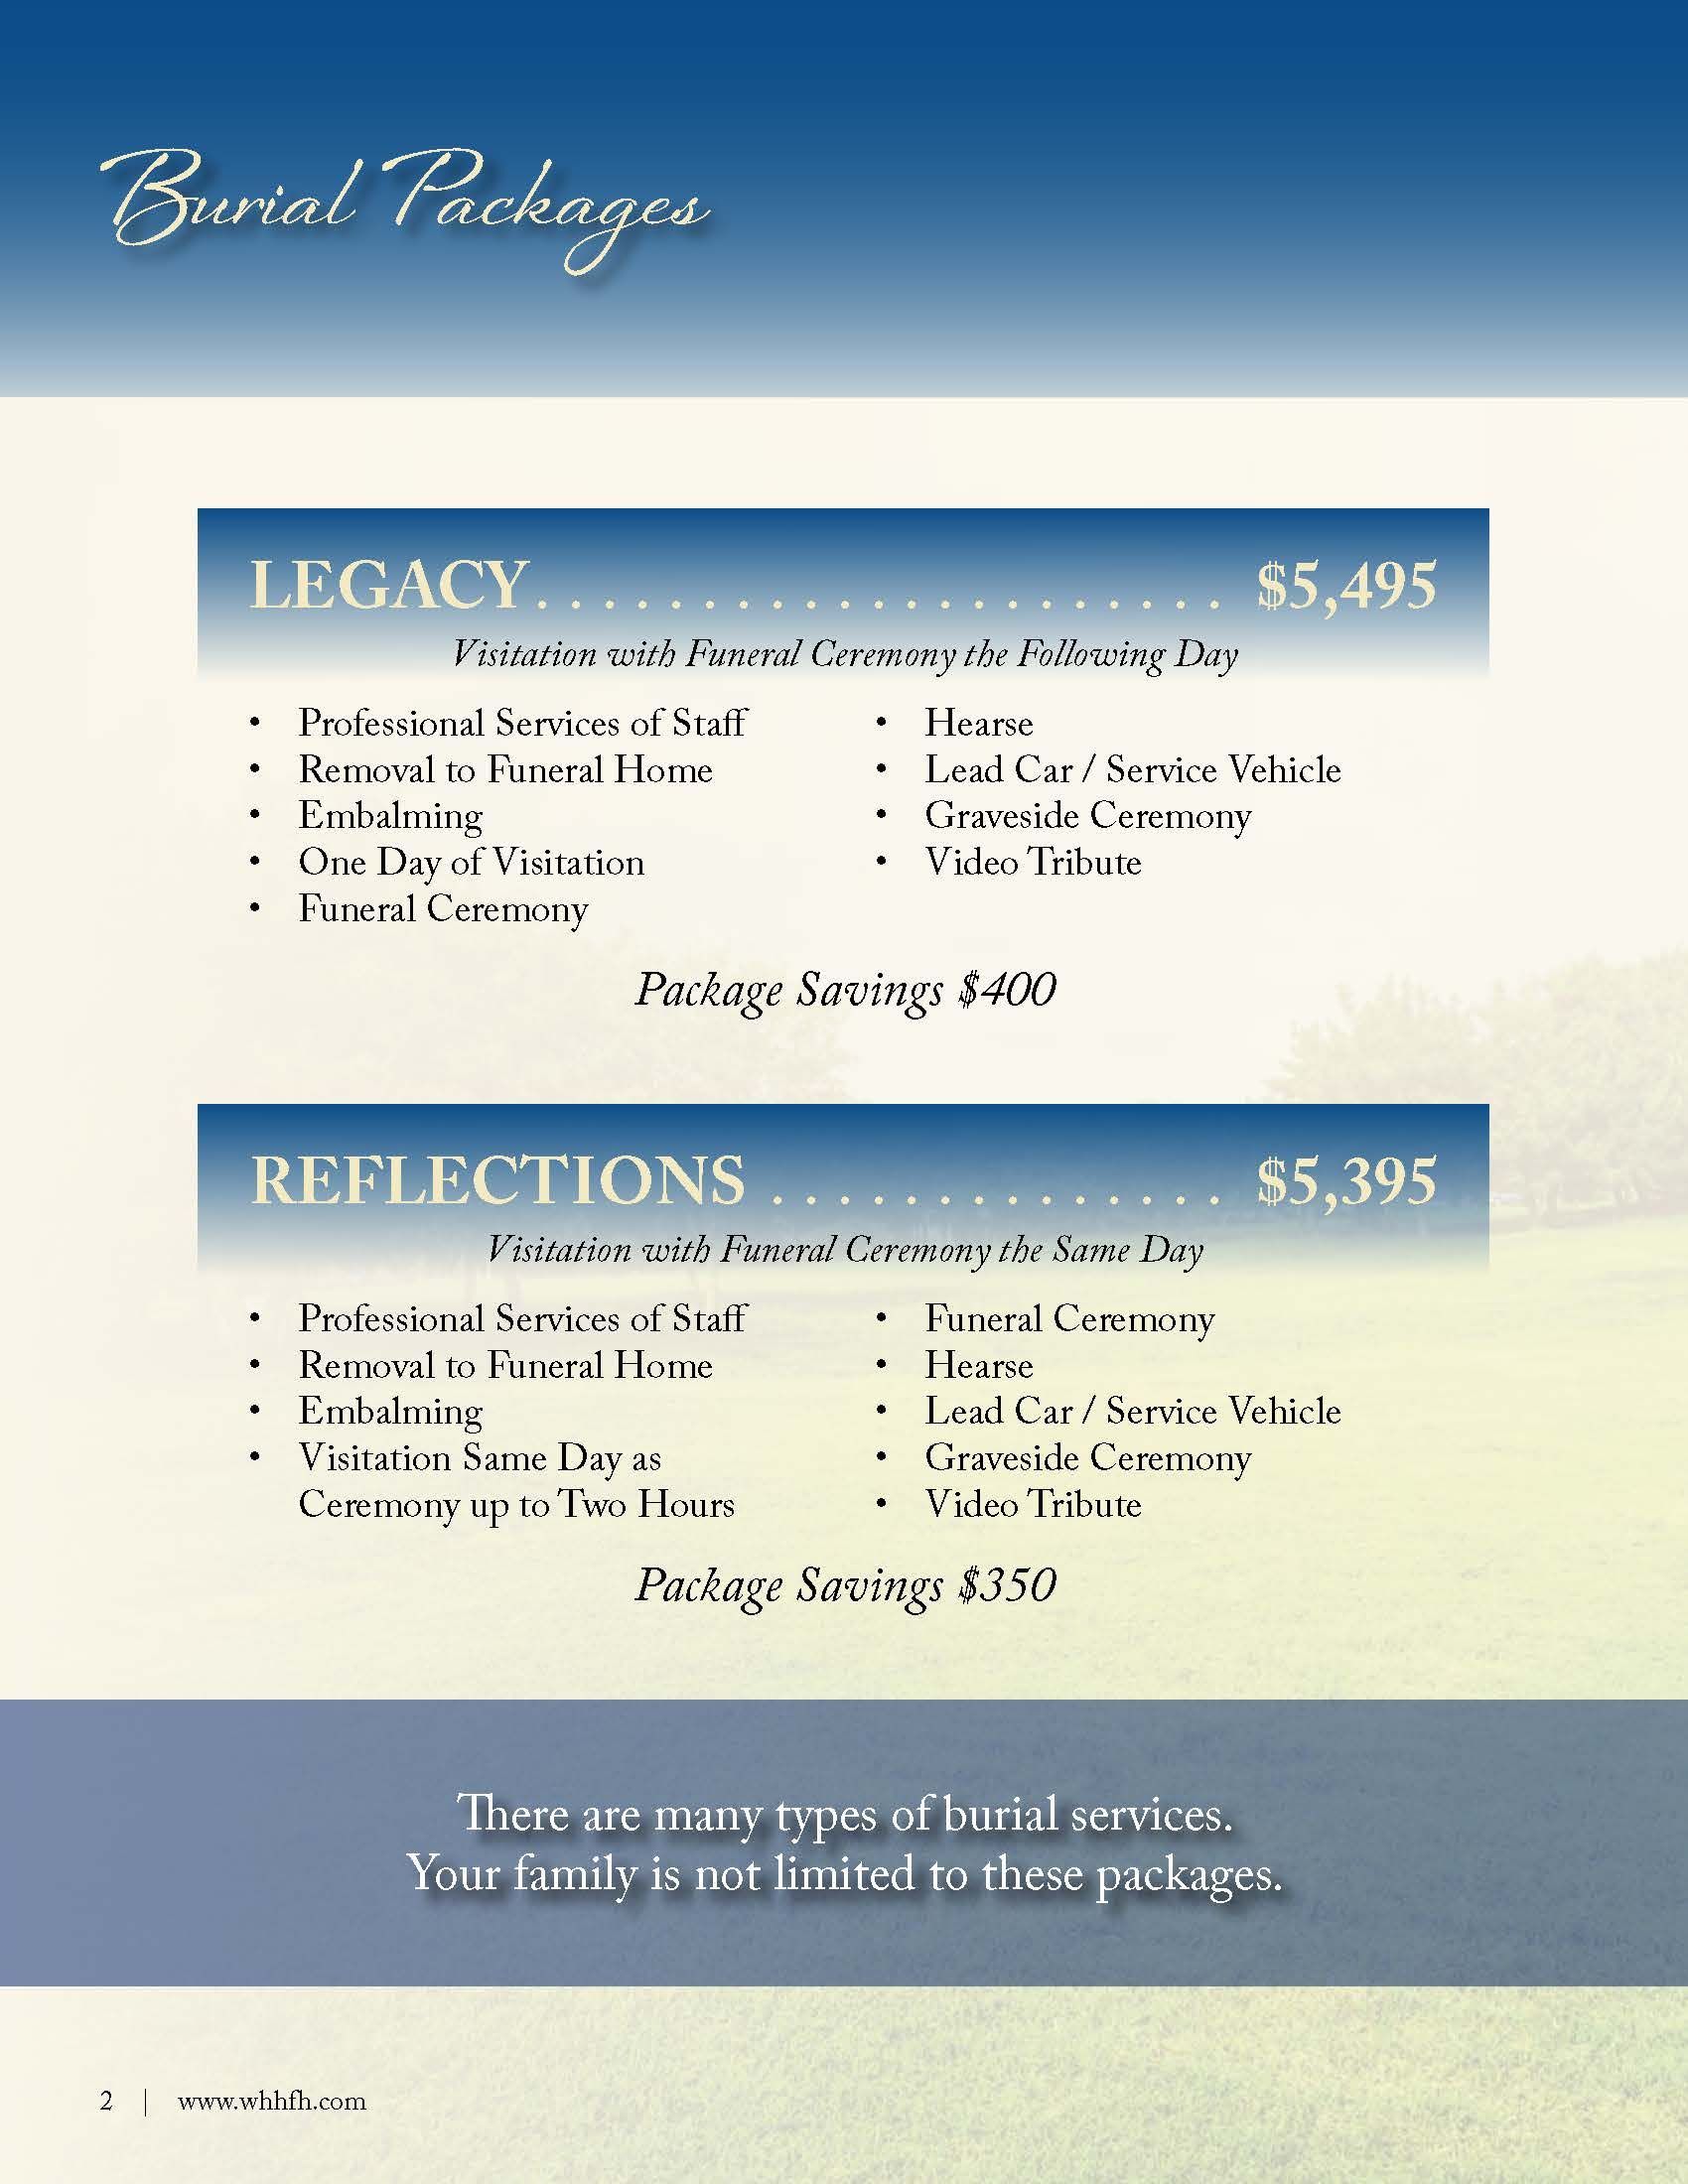 Burial Options Pricing Page 1